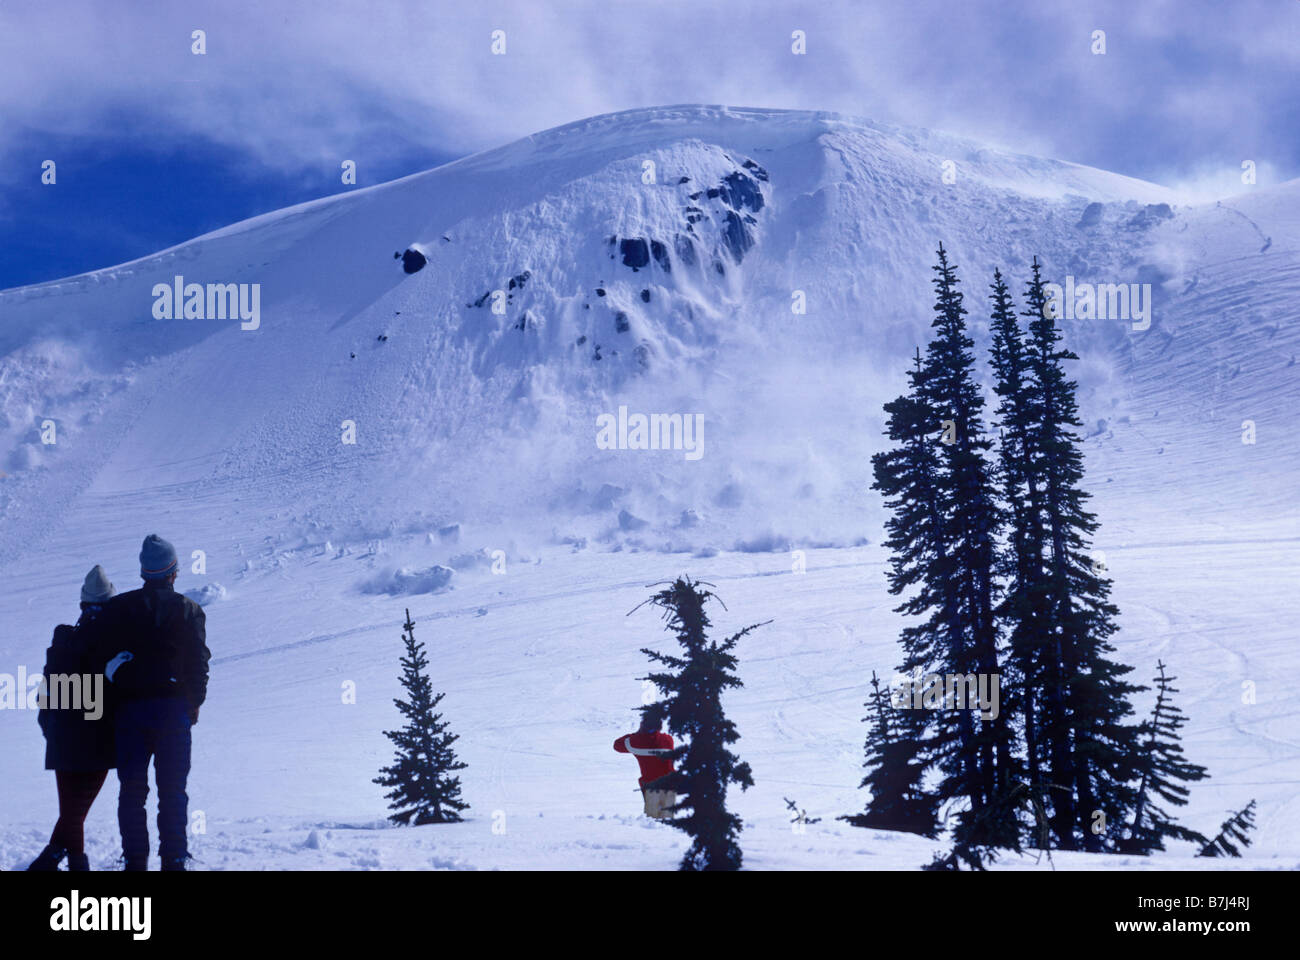 Archival image of Avalanche, Whistler, British Columbia, Canada Stock Photo